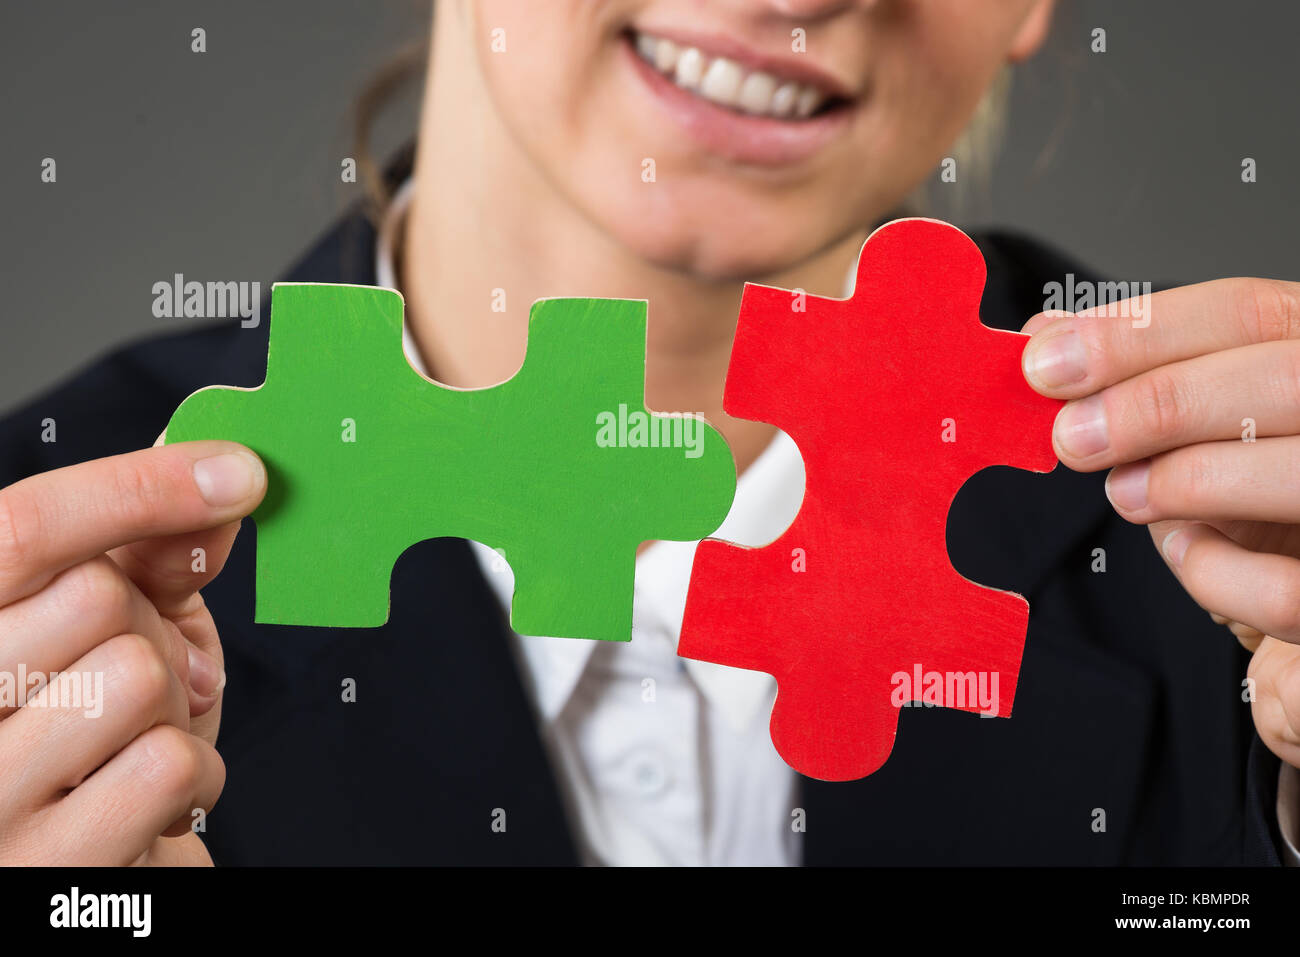 Midsection of businesswoman solving jigsaw puzzle over gray background Stock Photo